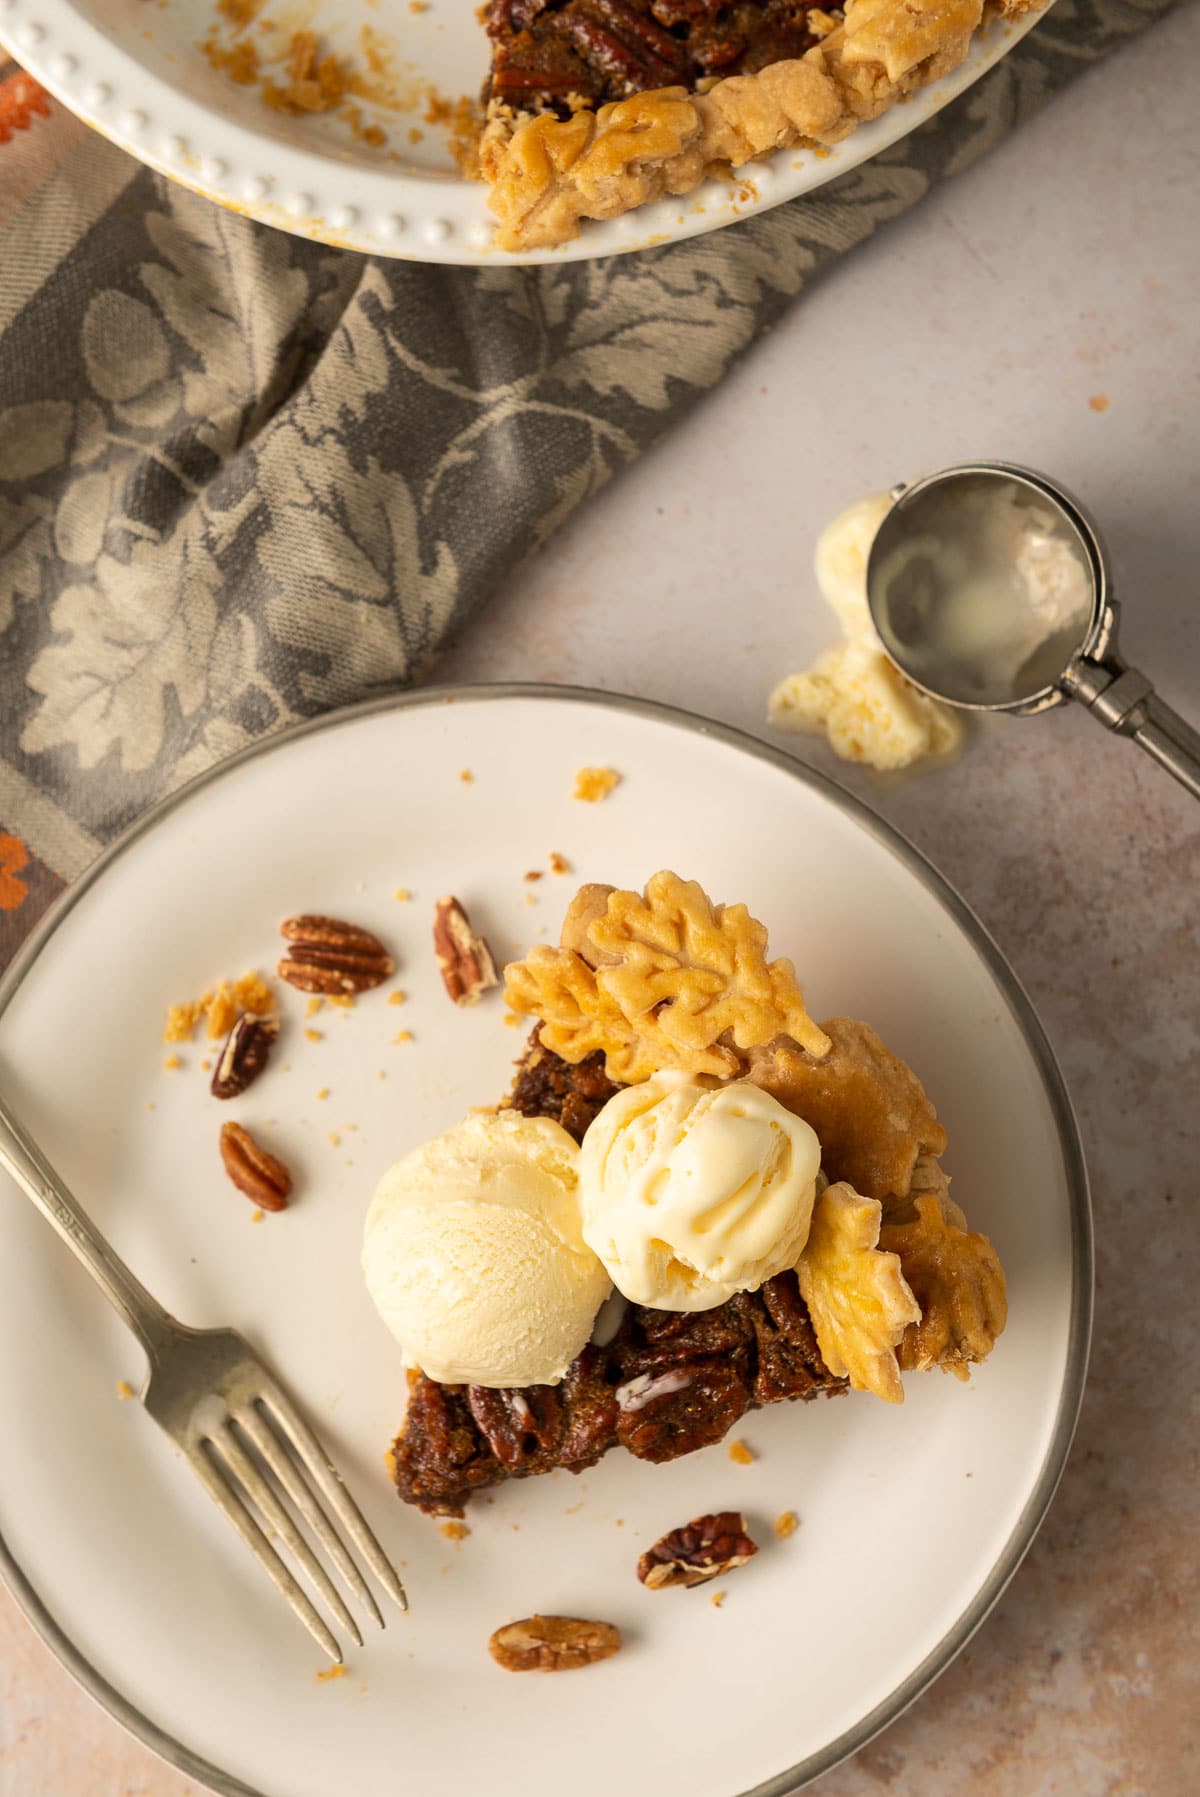 Flatlay of a slice of pecan pie with two scoops of vanilla ice cream on top.